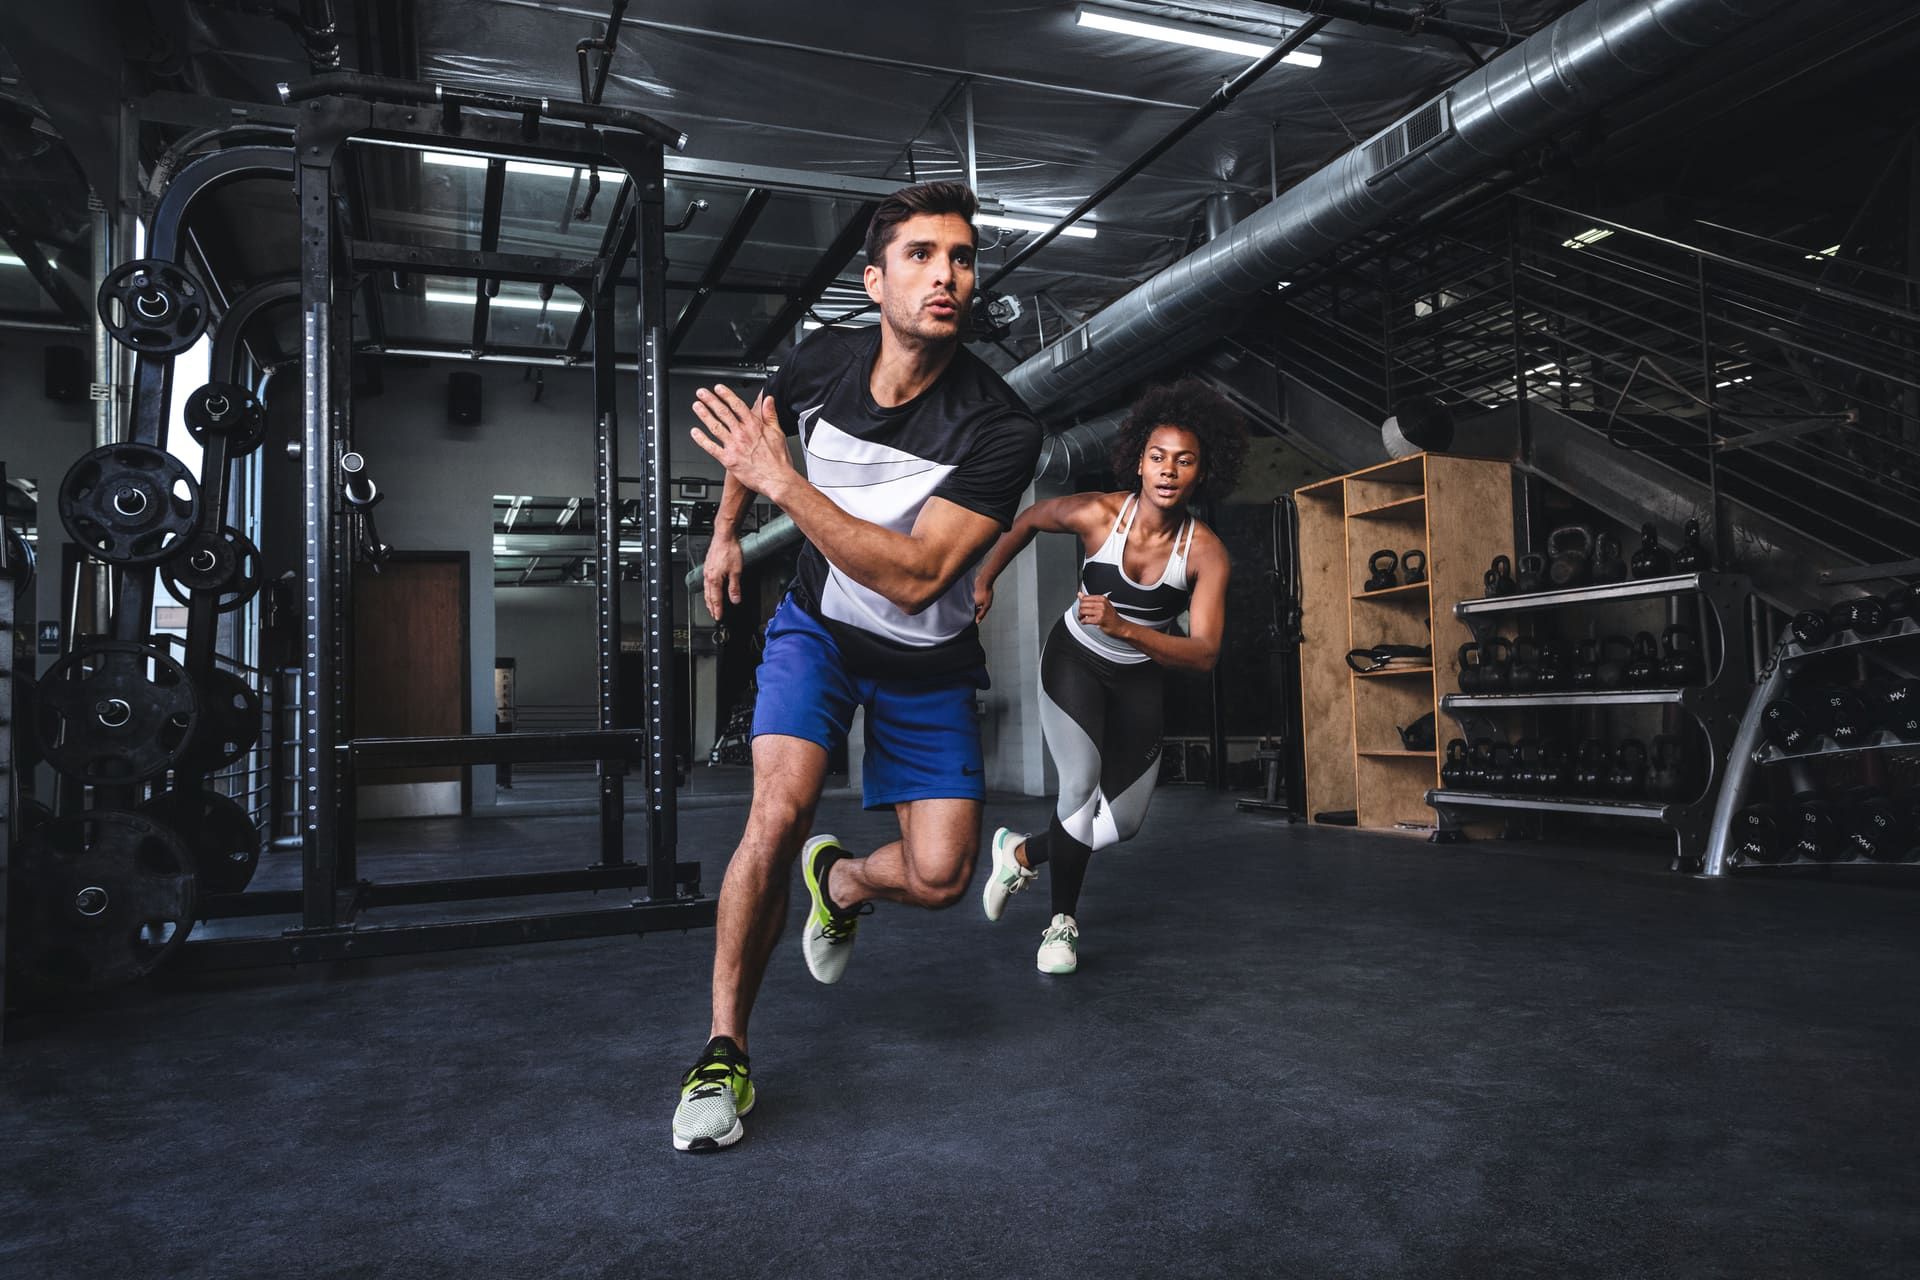 nike discount for personal trainers